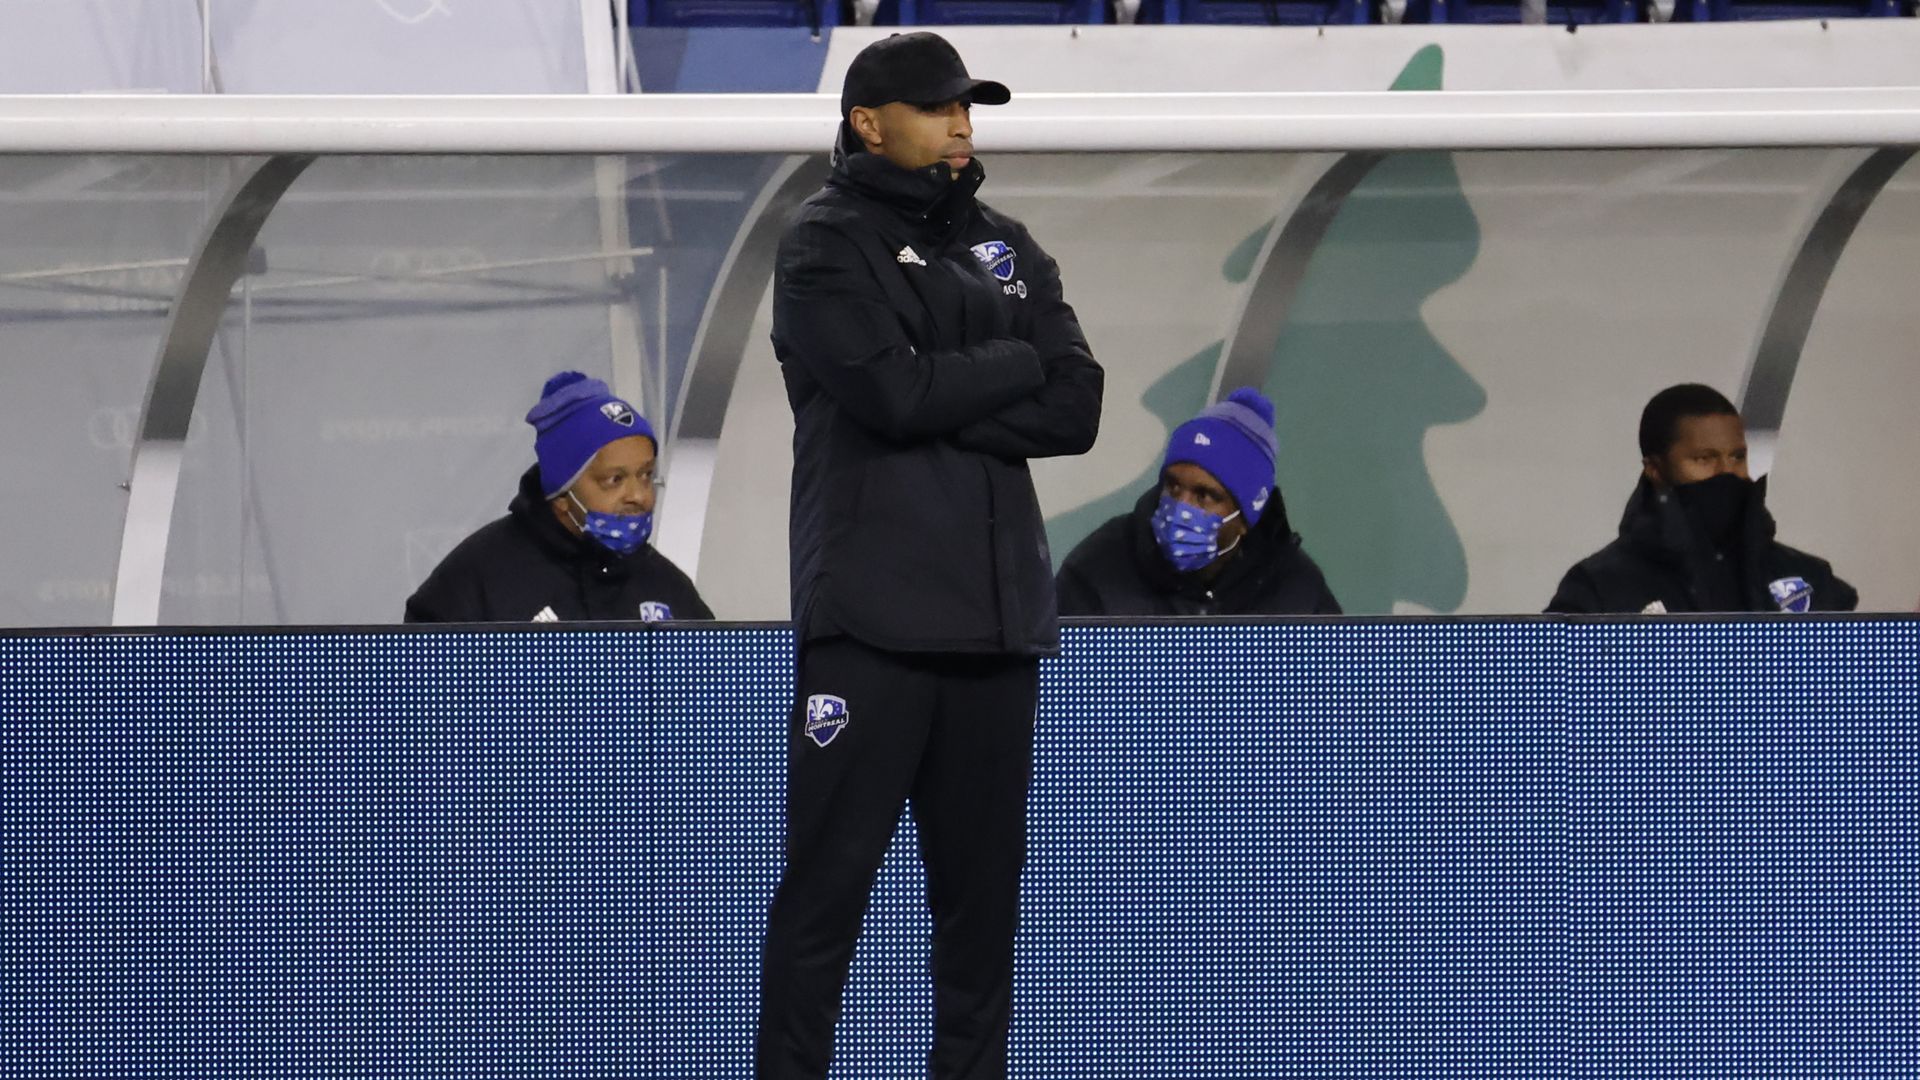 thierry henry on sideline of montreal mls game as coach